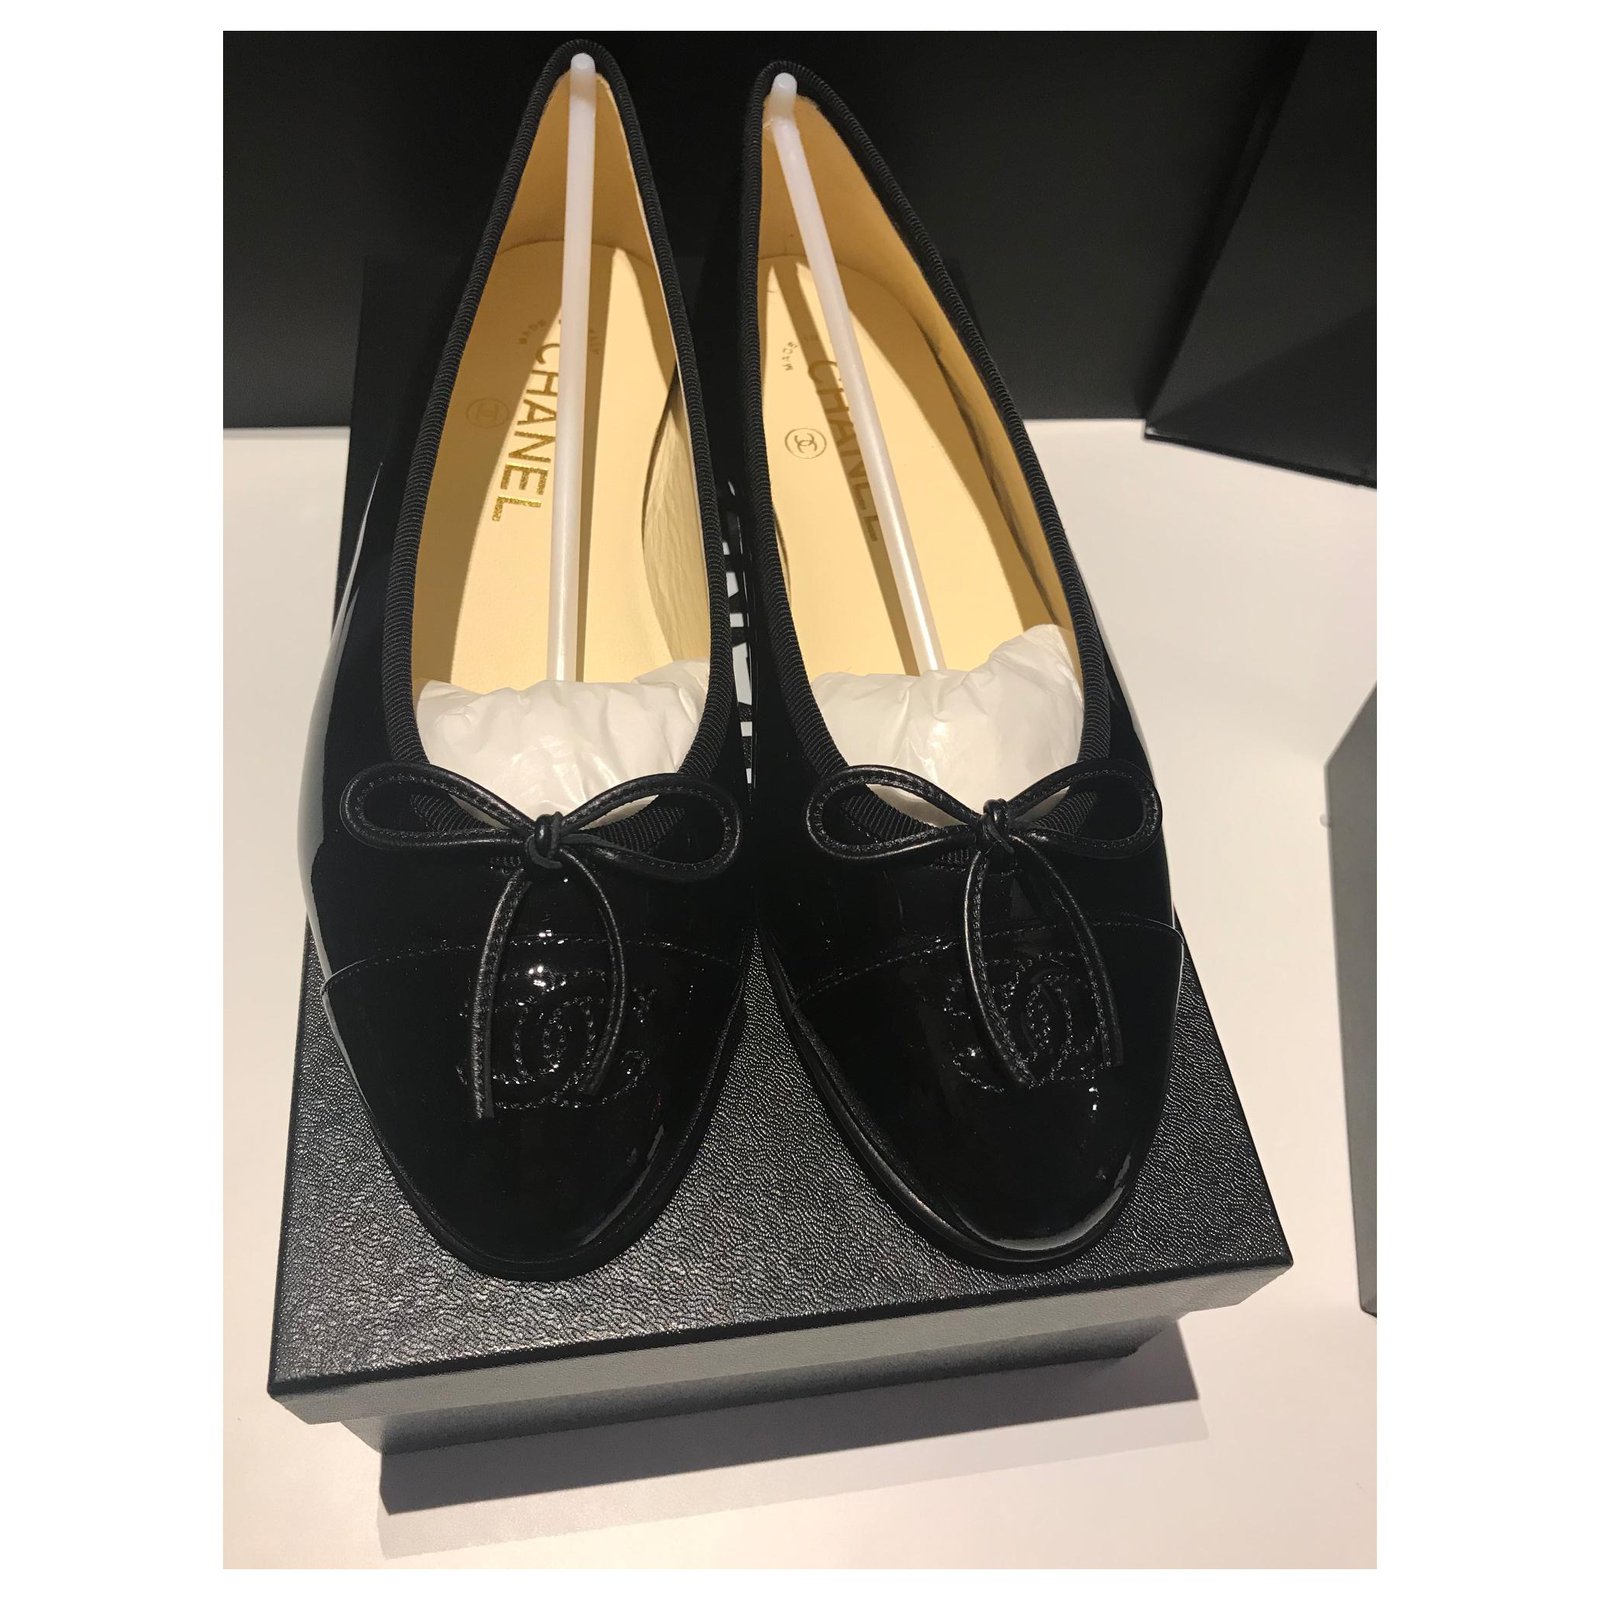 Chanel ballerinas in black patent calf leather 37 , sold with box